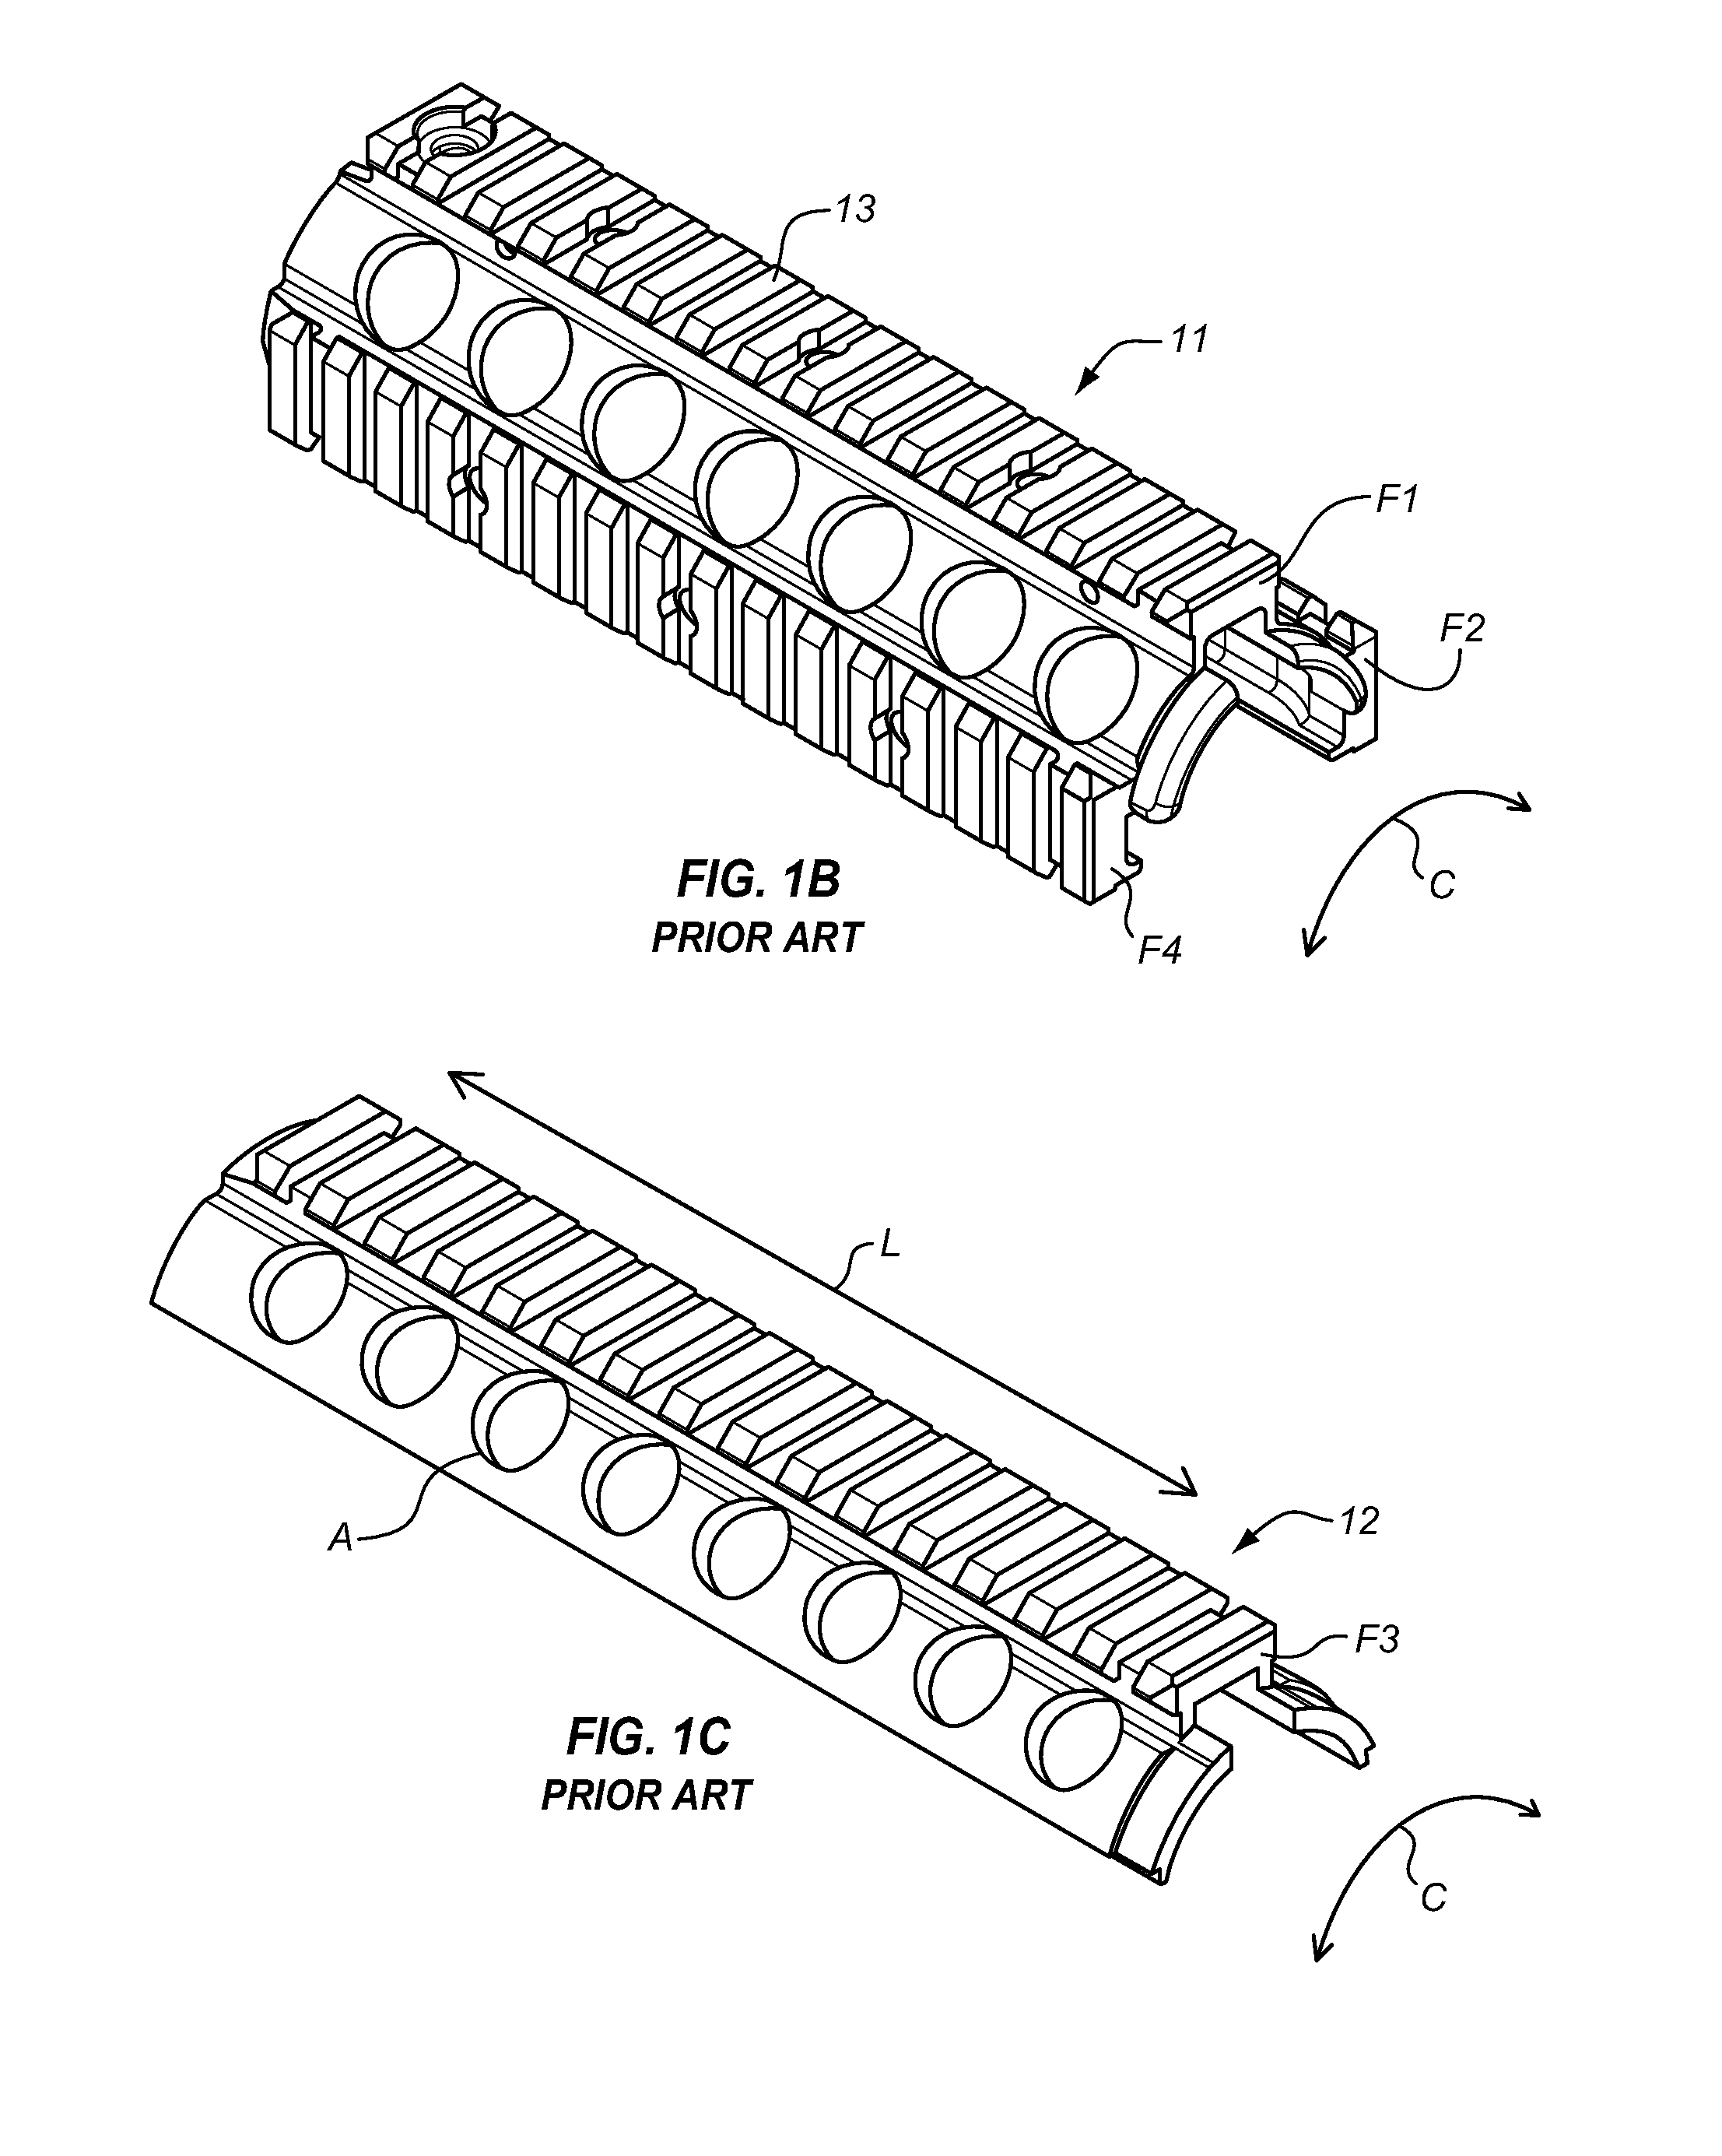 Rail contacts for accessories mounted on the powered rail of a weapon